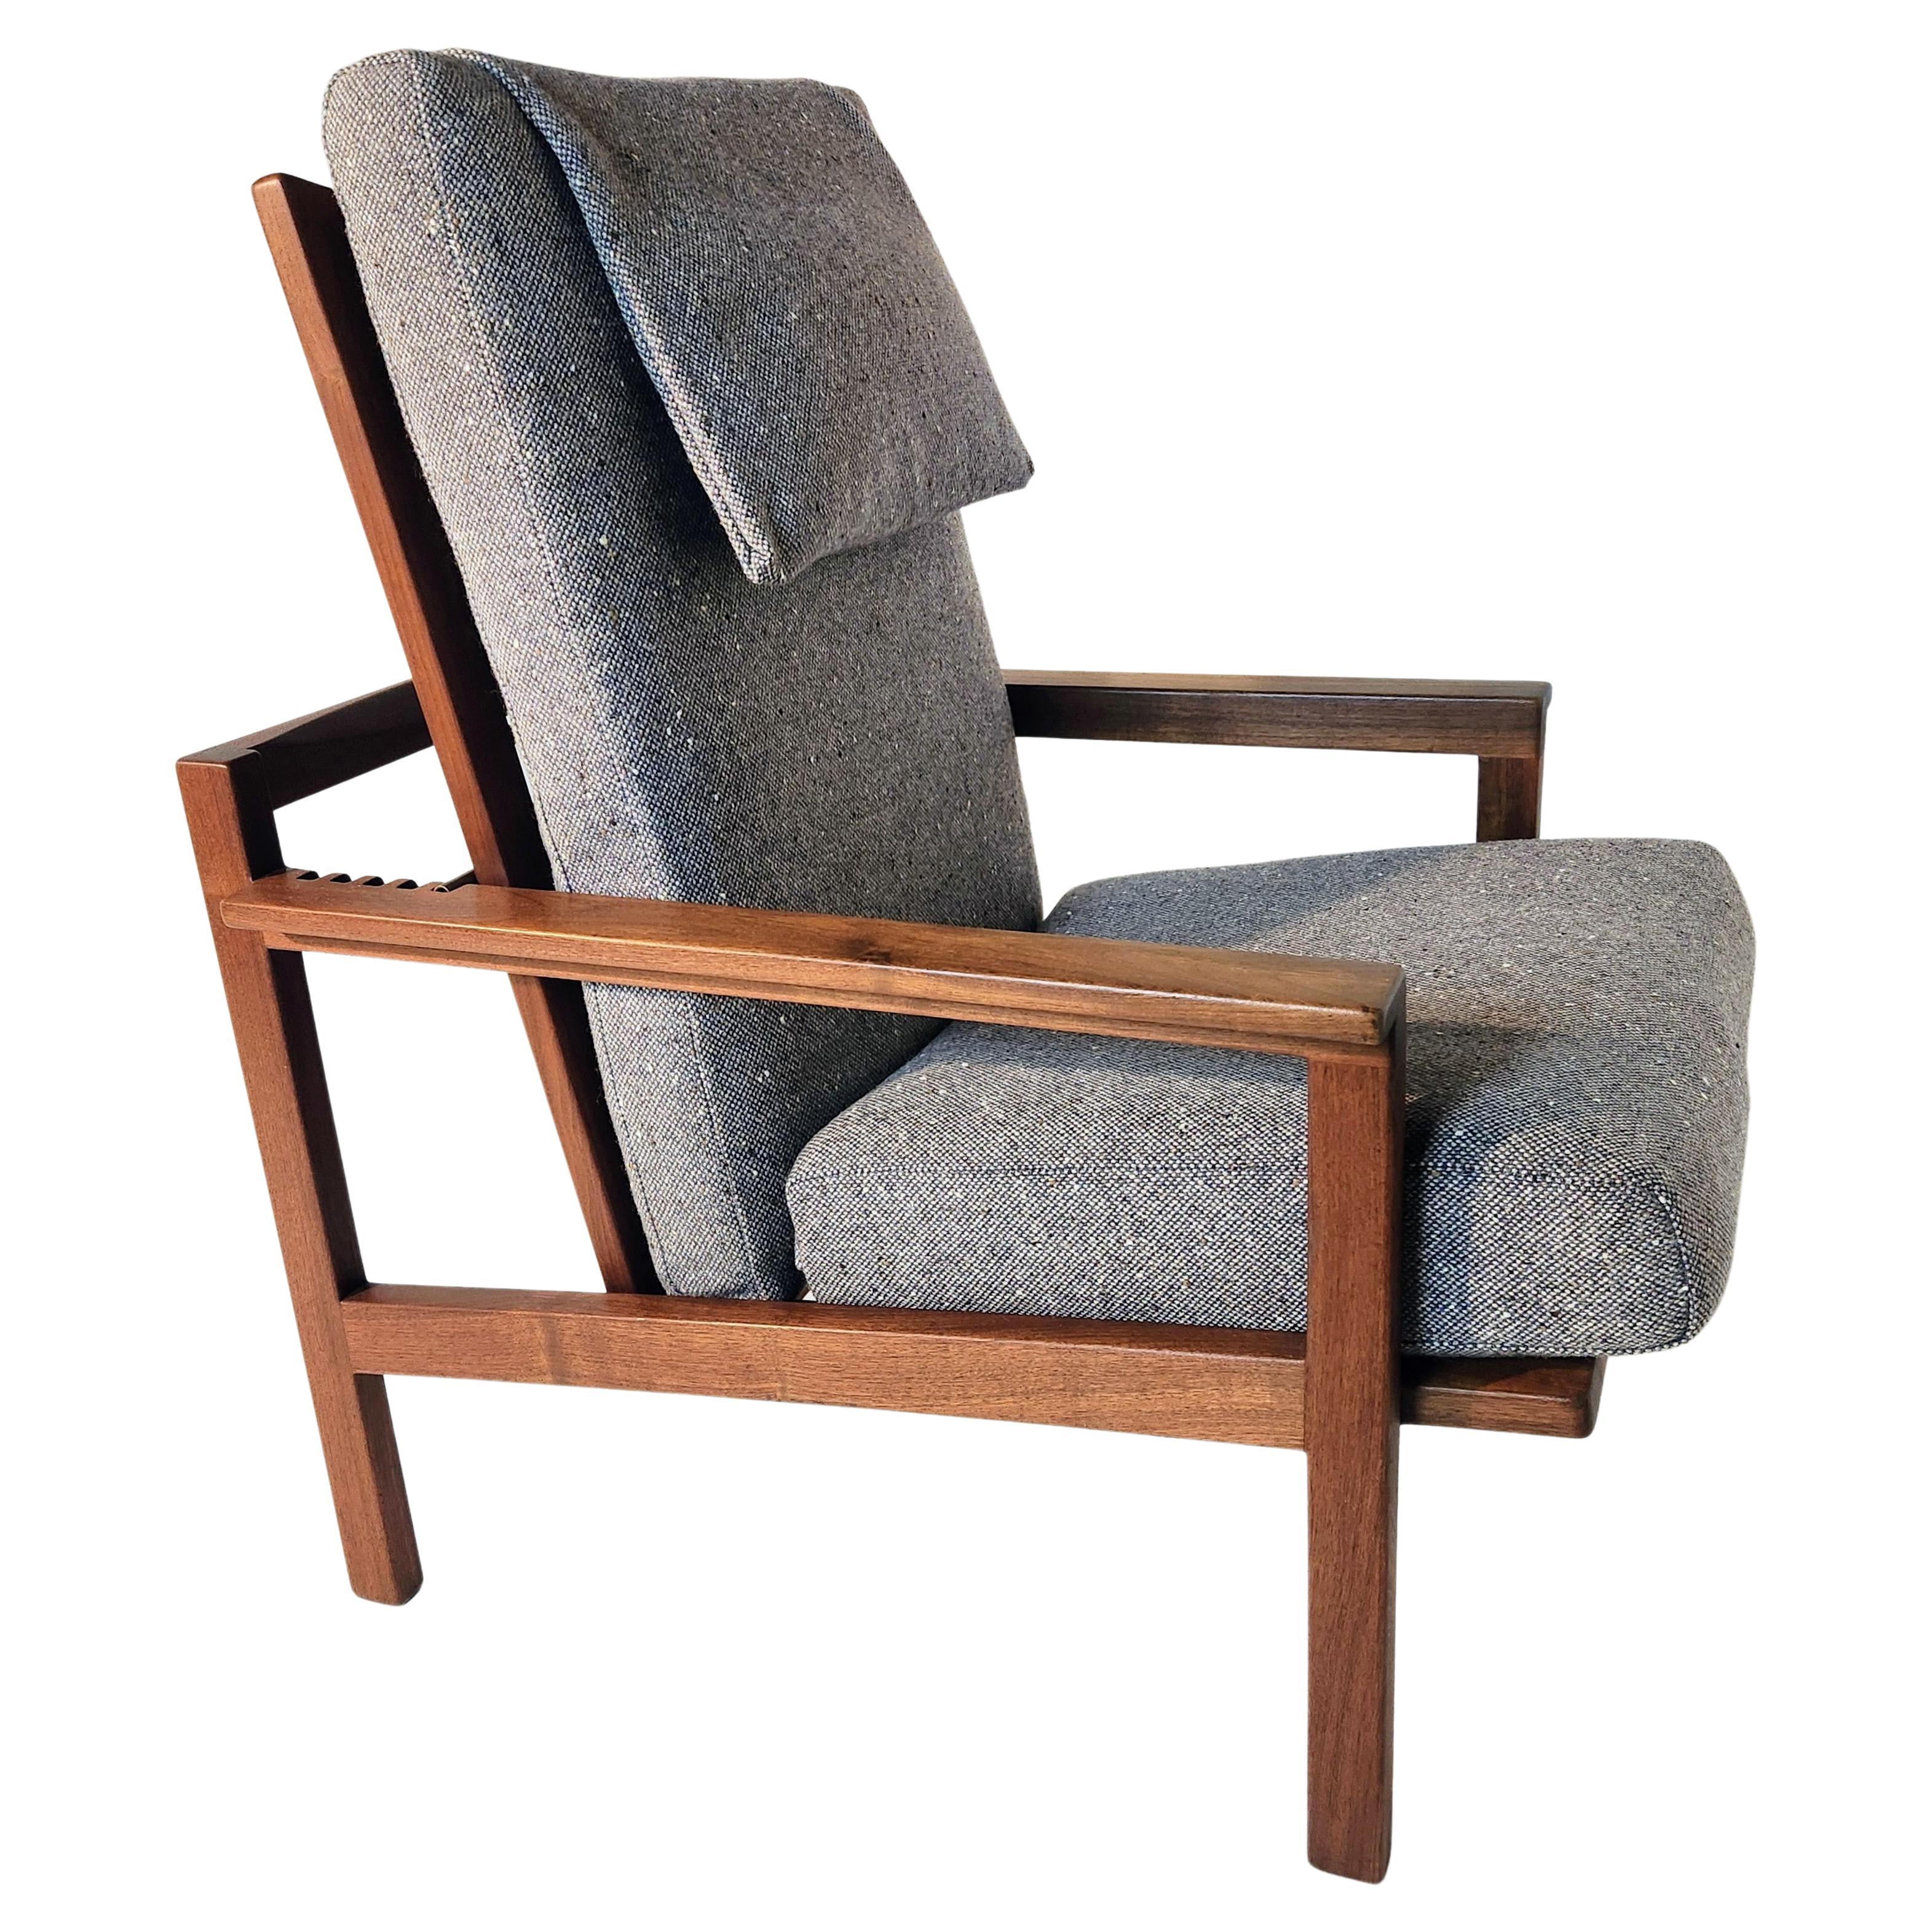 Walnut Adjustable Lounge Chair Arden Riddle (1921-2011) pre-1965 For Sale